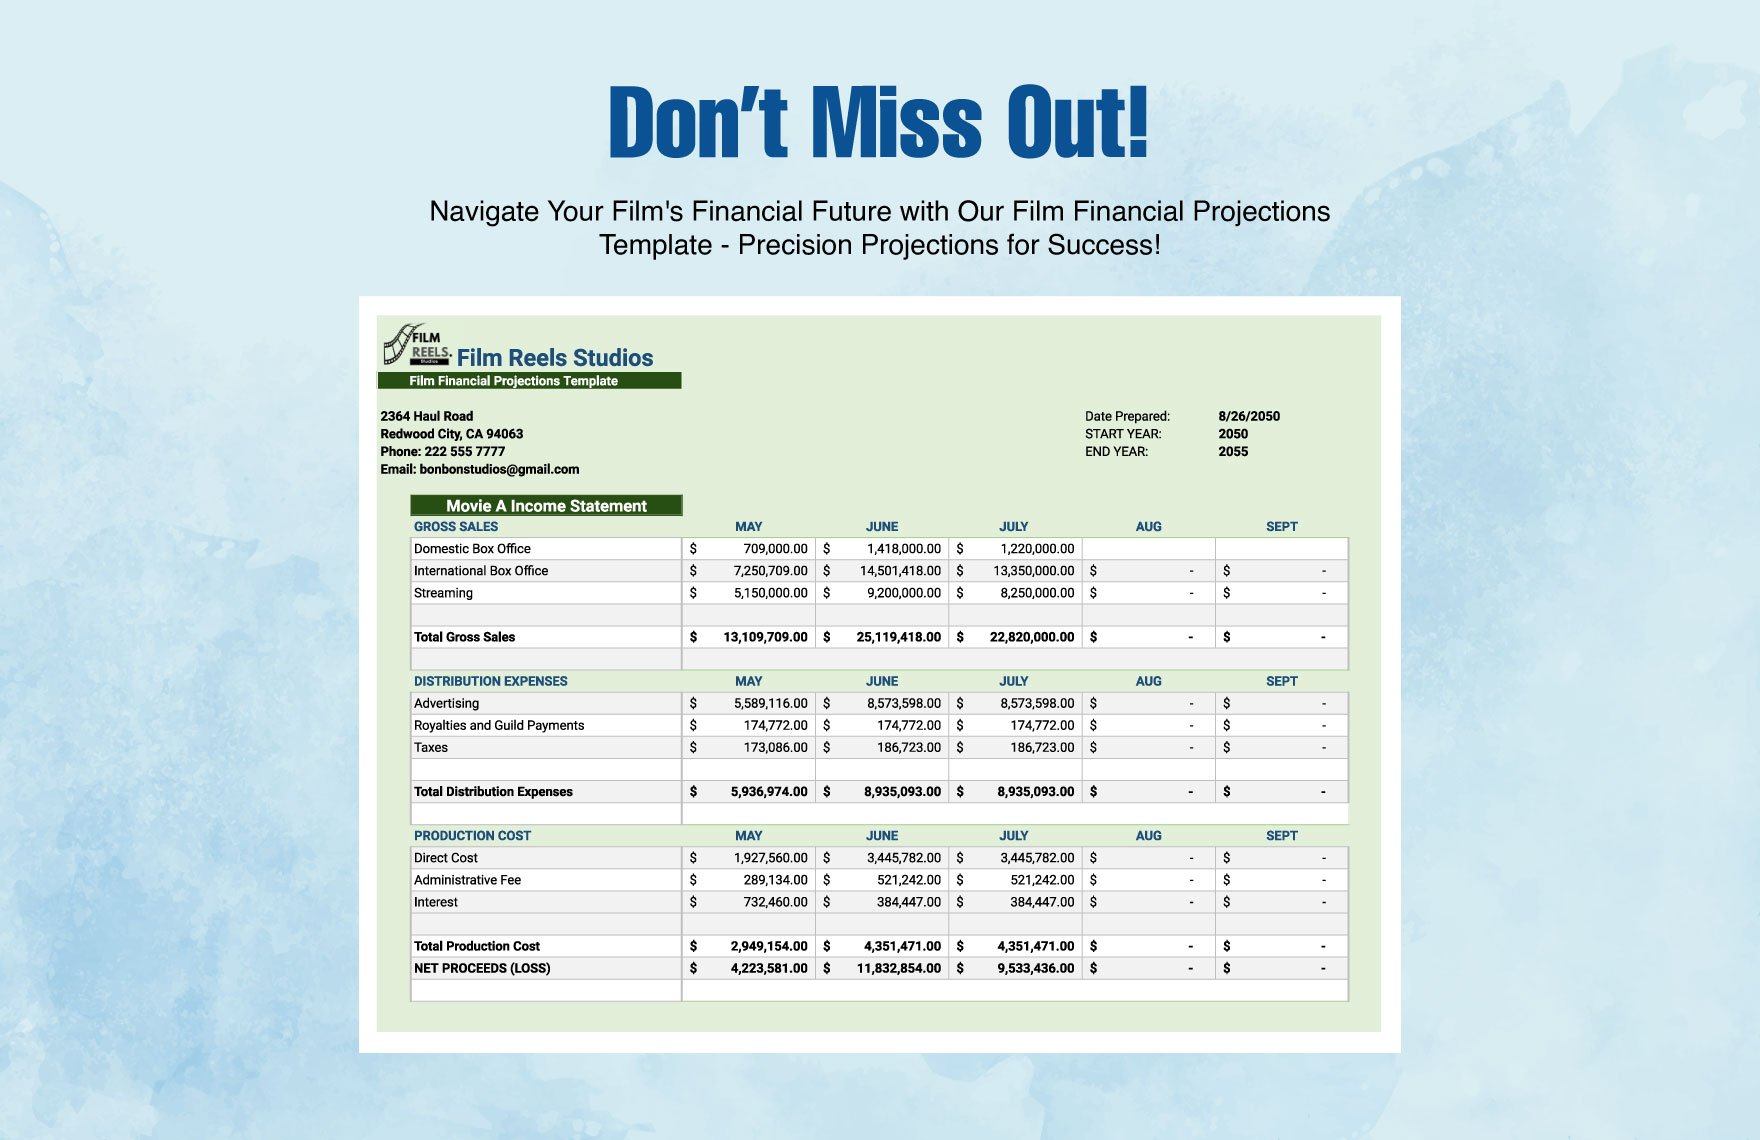 Film Financial Projections Template